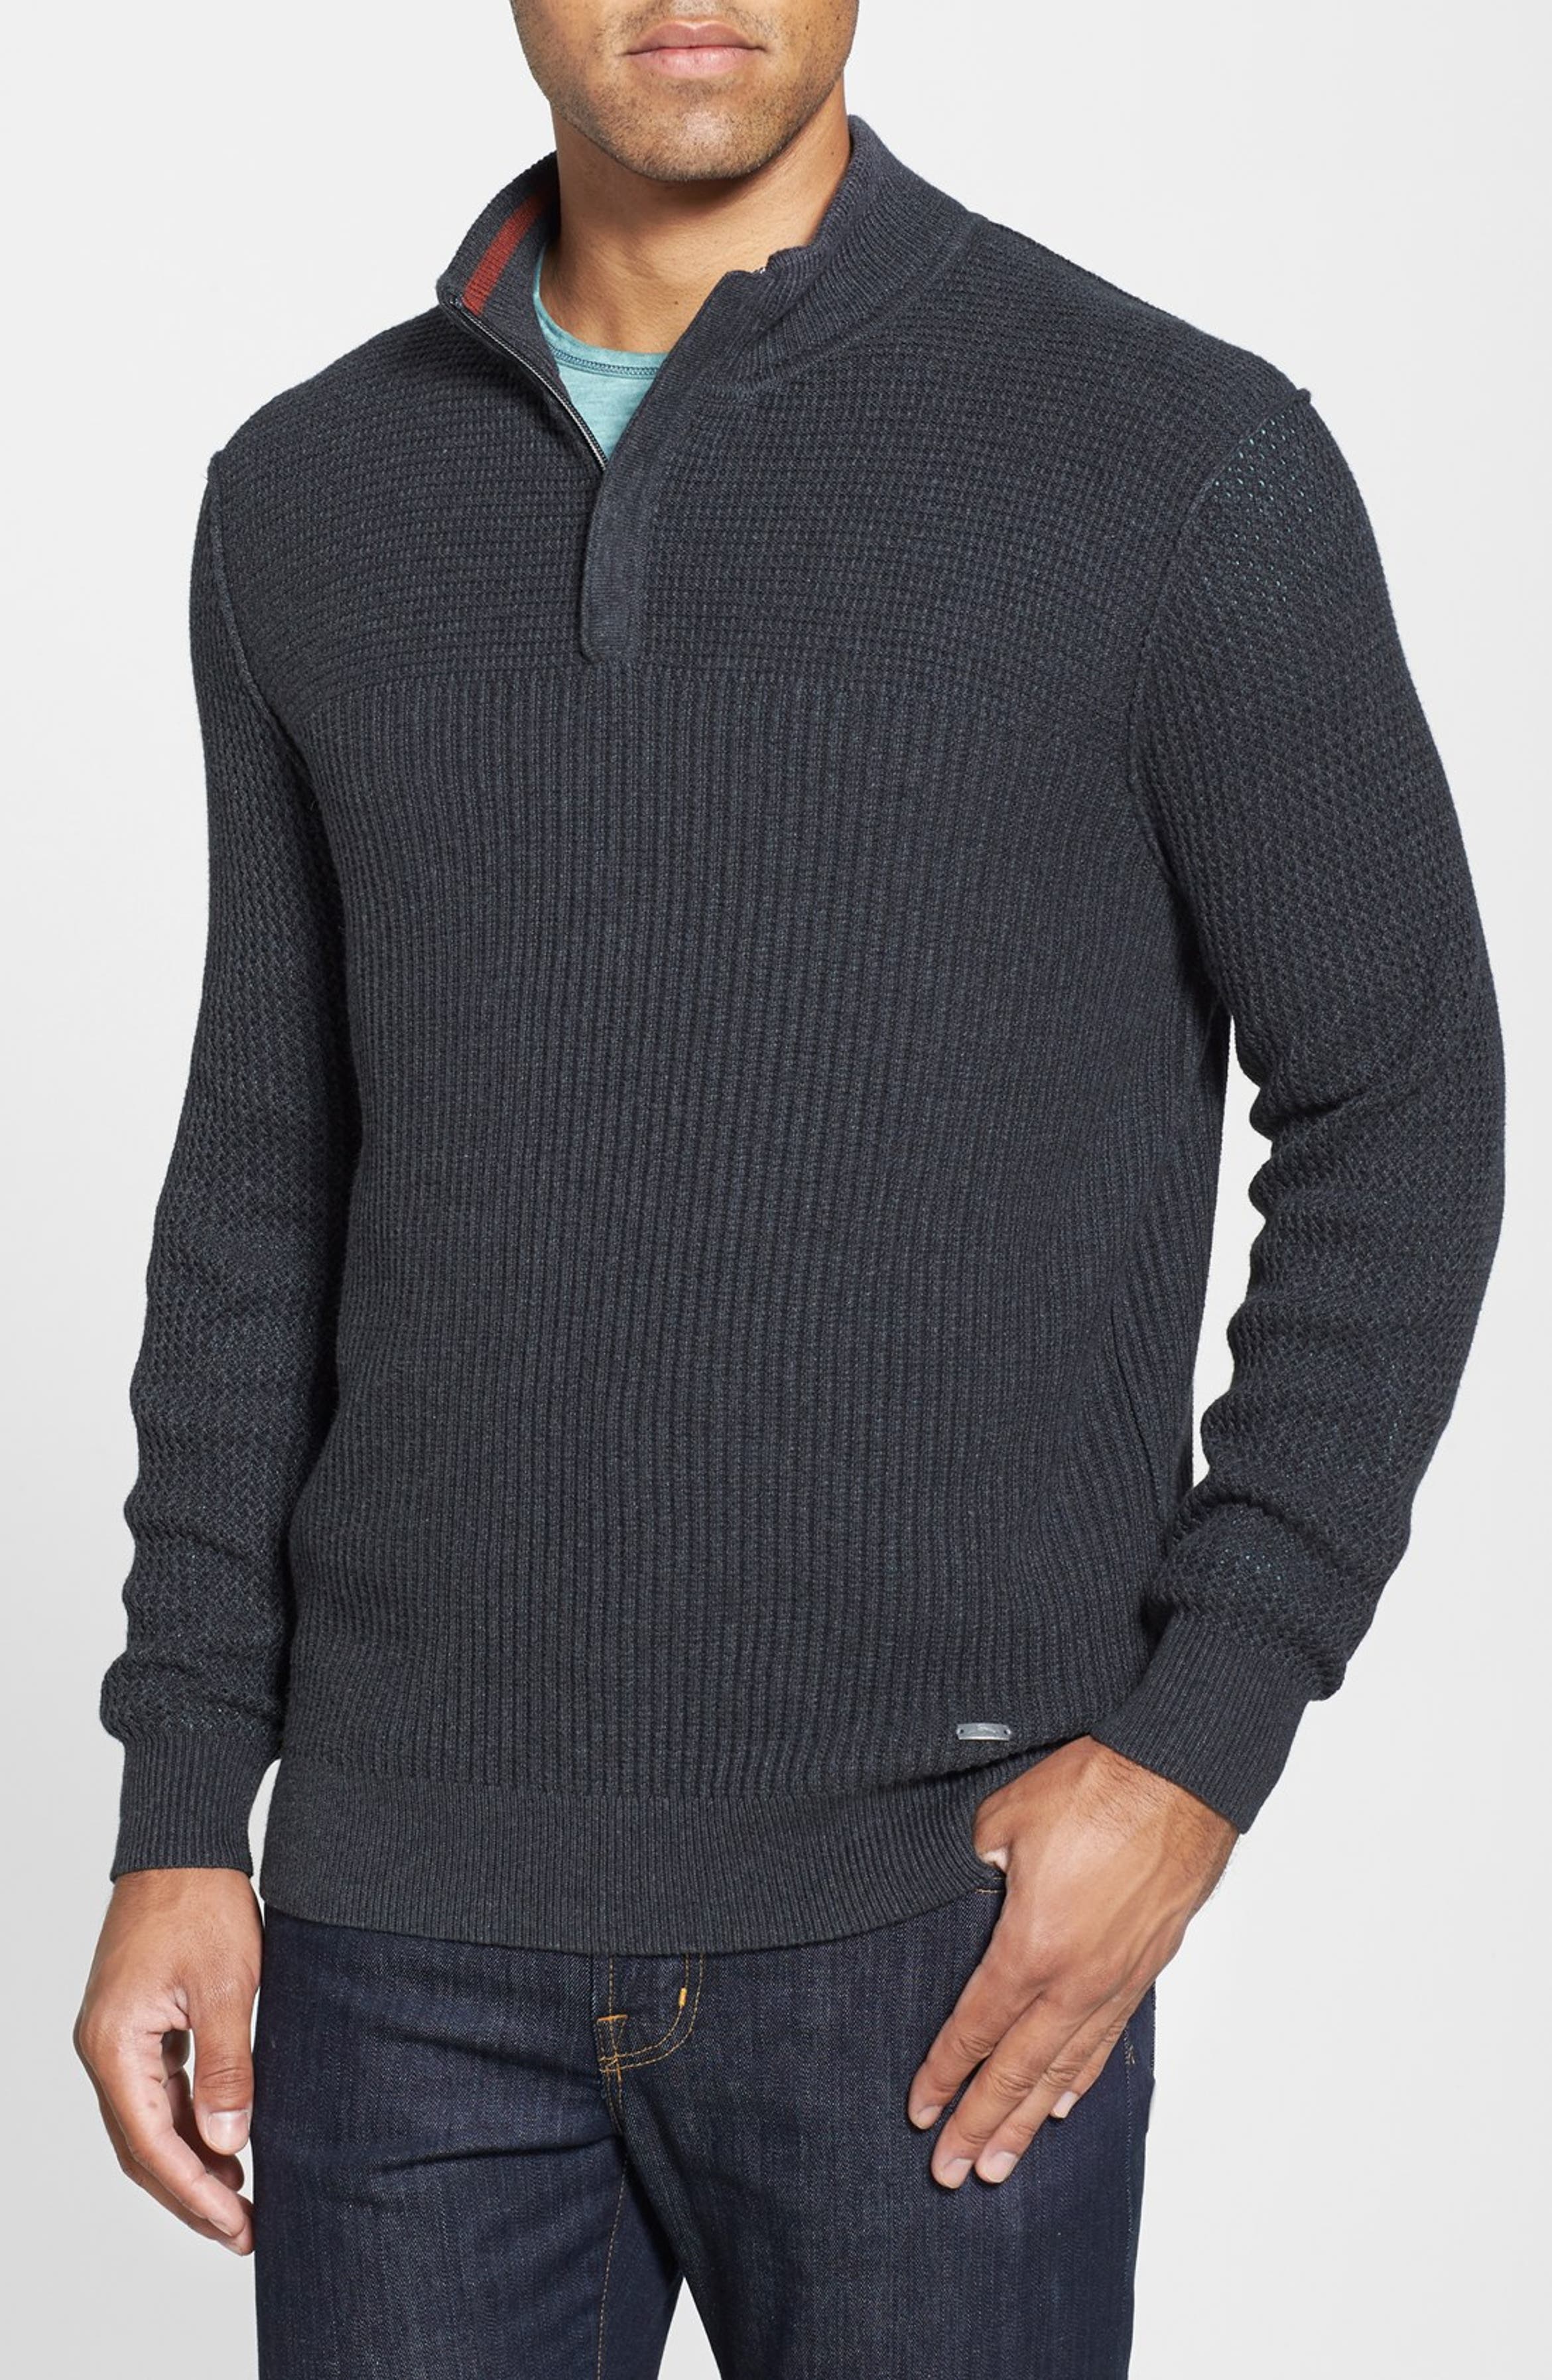 Tommy Bahama 'Island Luxe' Cotton & Cashmere Sweater | Nordstrom